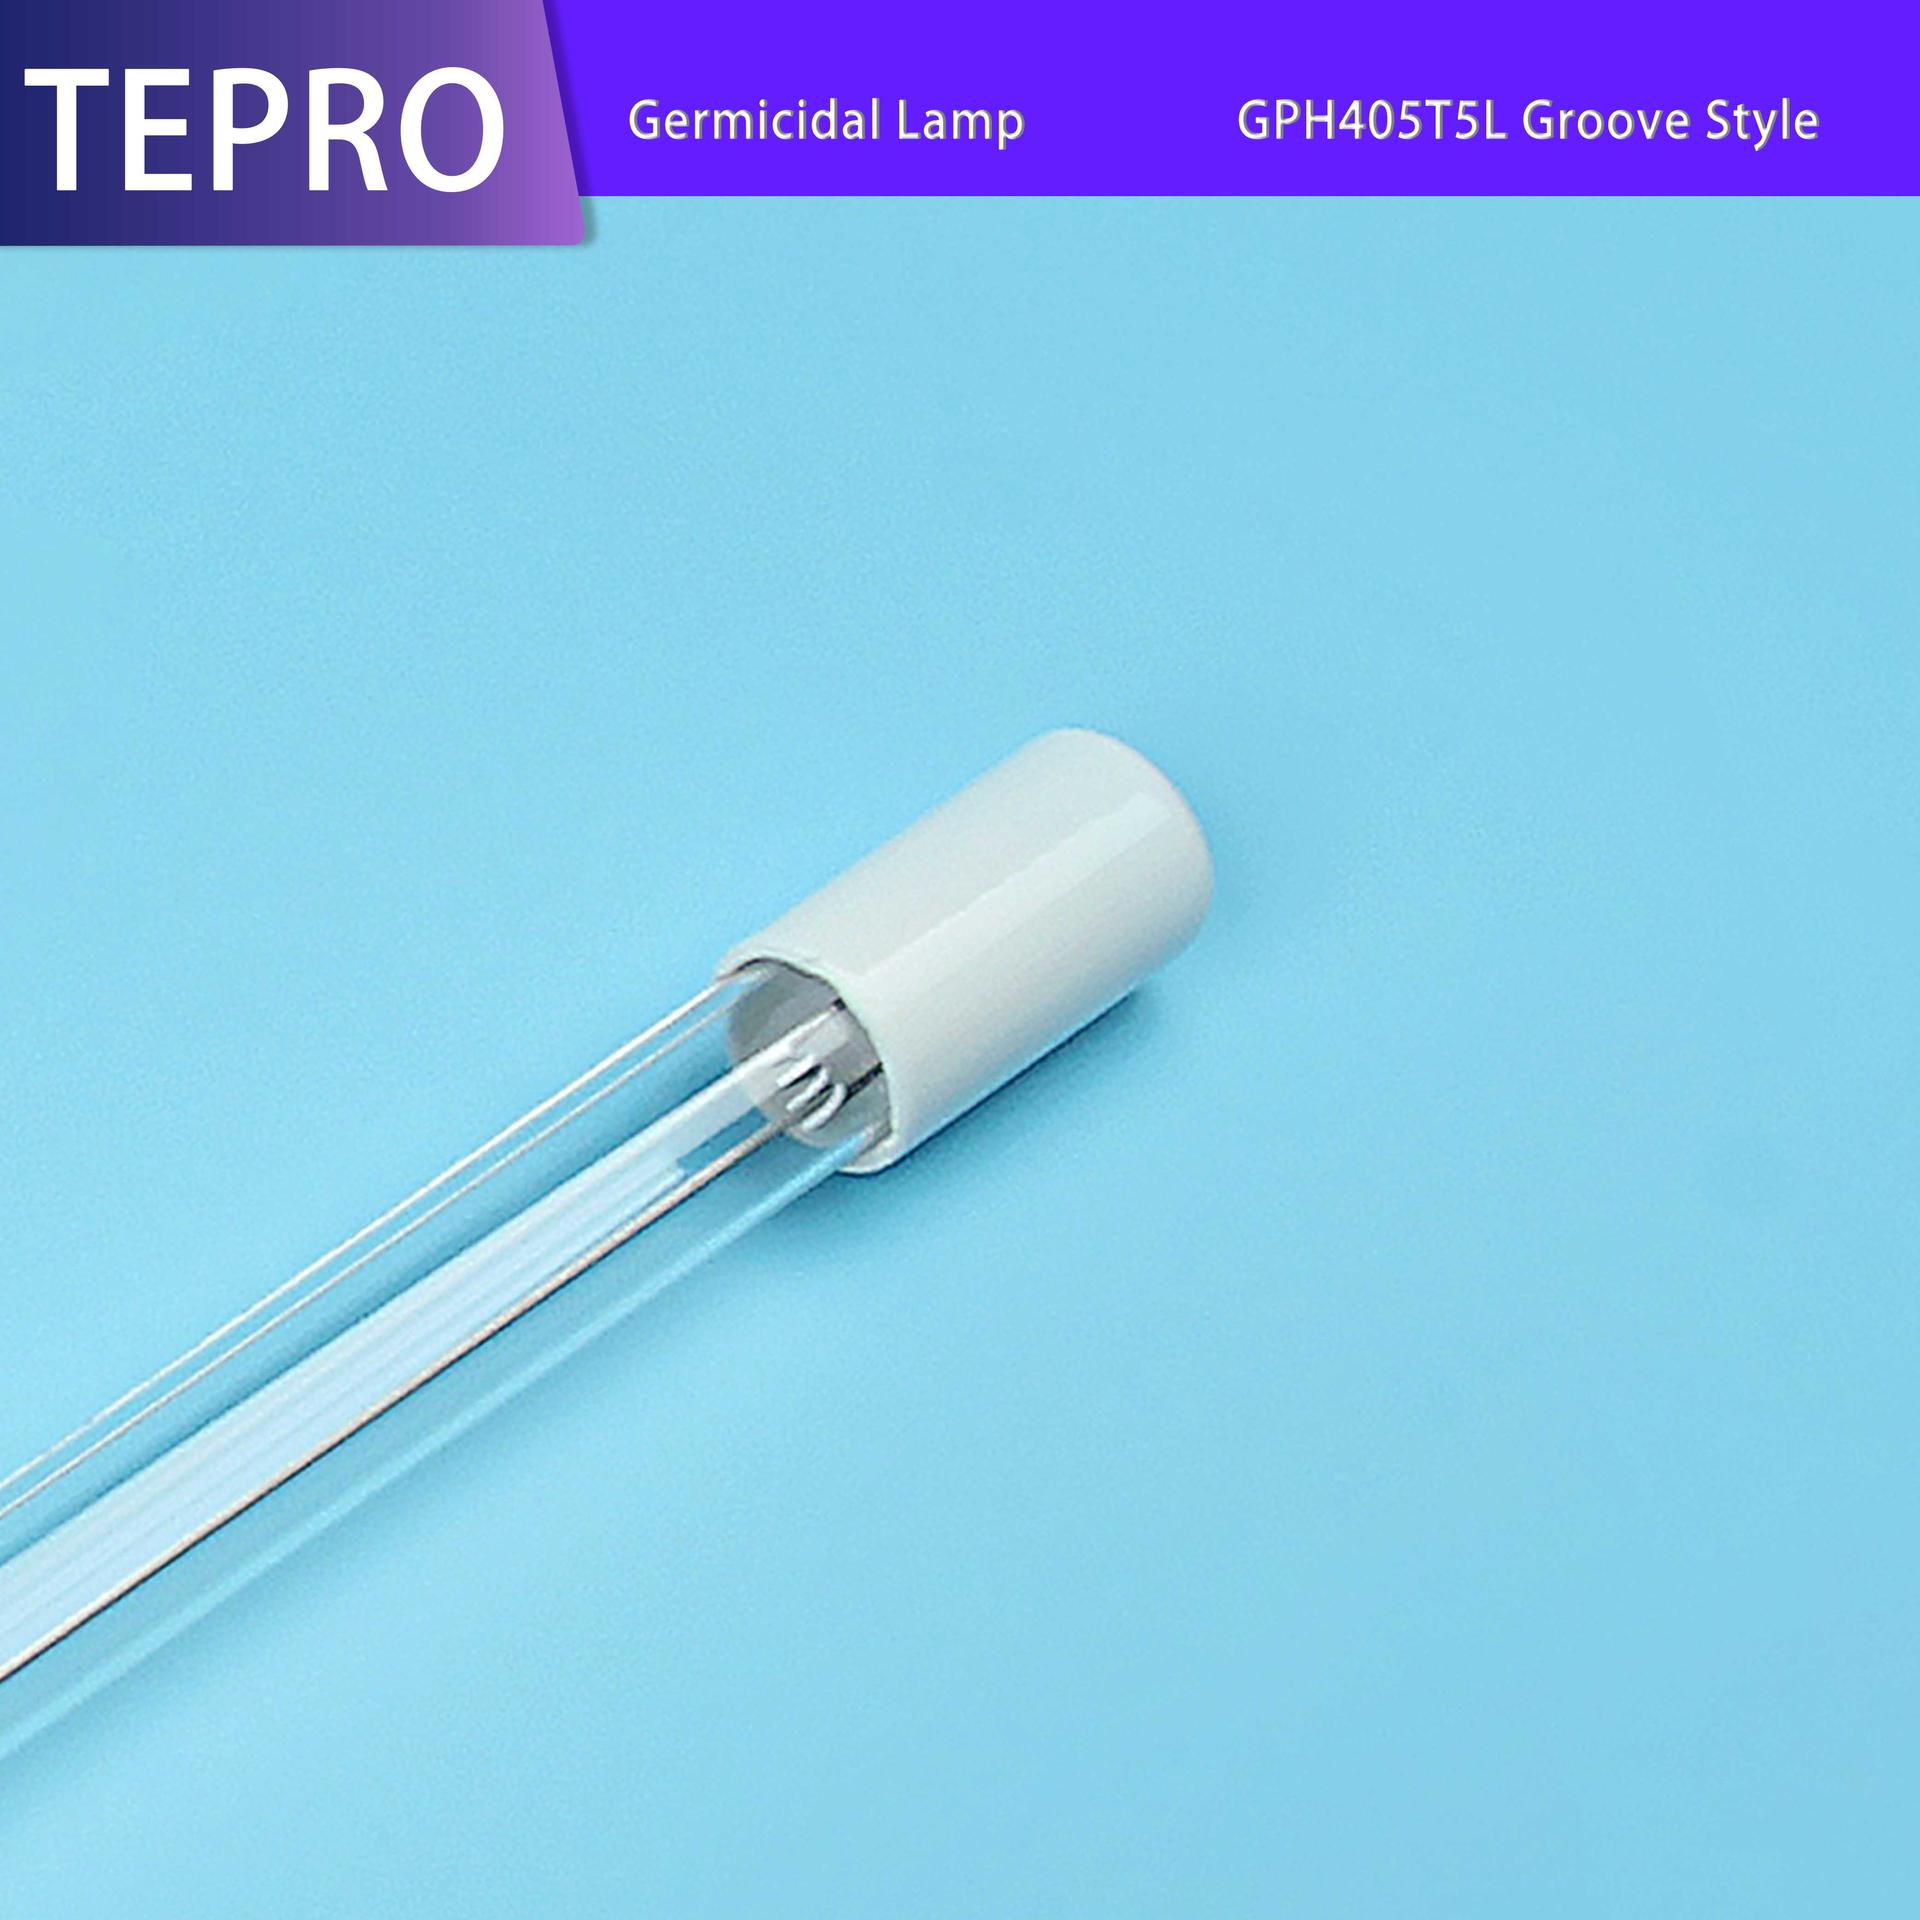 Uv Tube Lamp Special Base GPH405T5L Groove Style